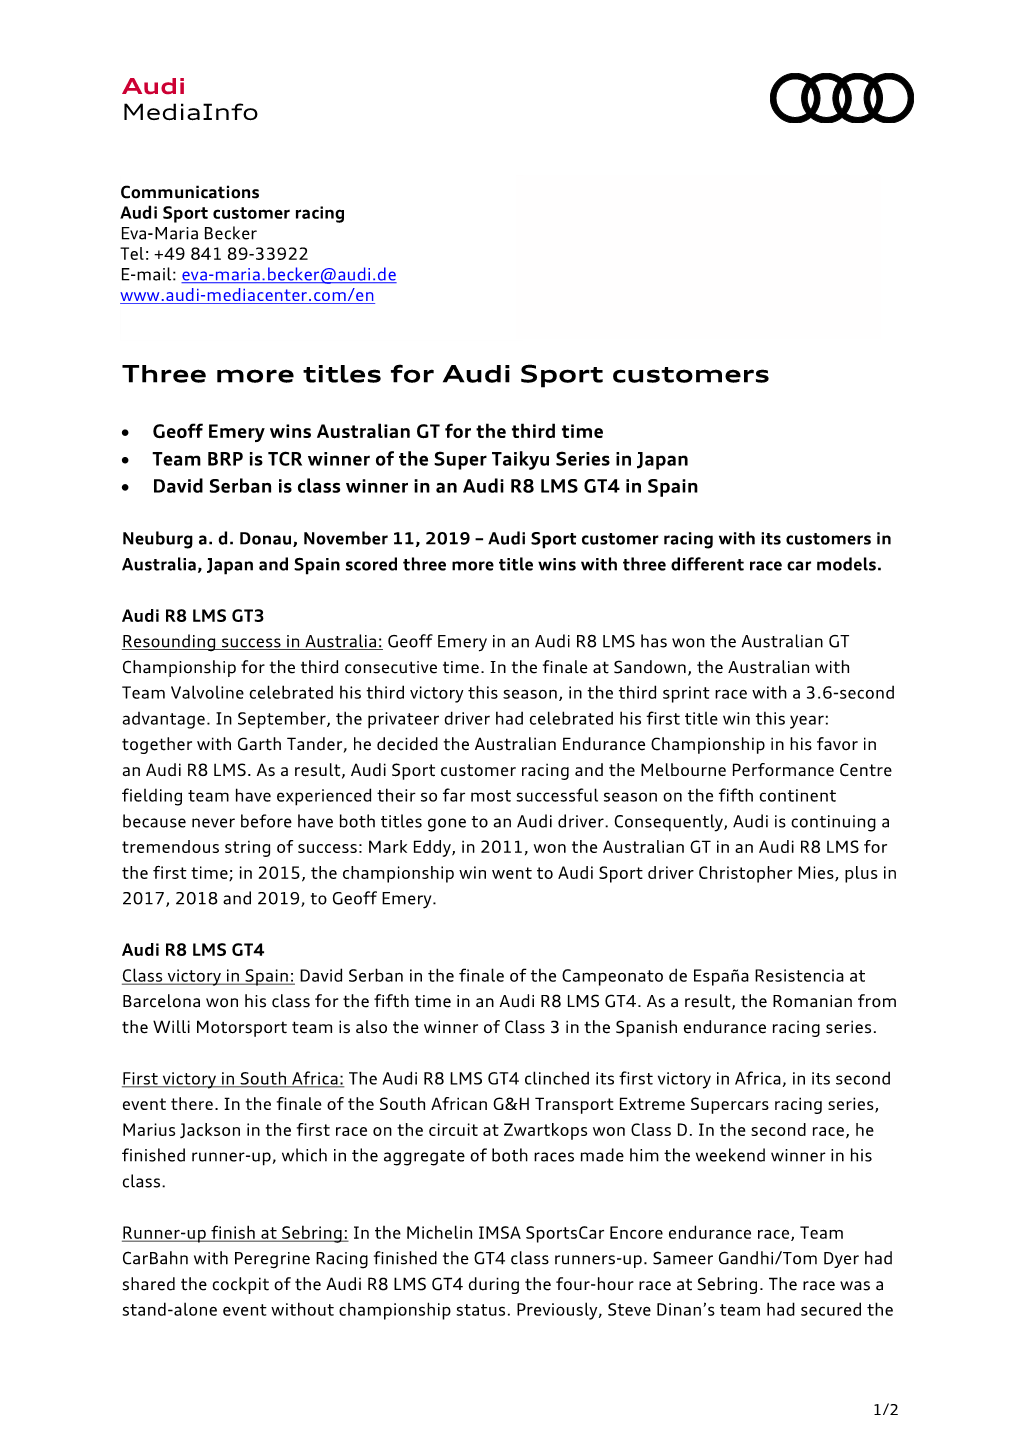 Three More Titles for Audi Sport Customers